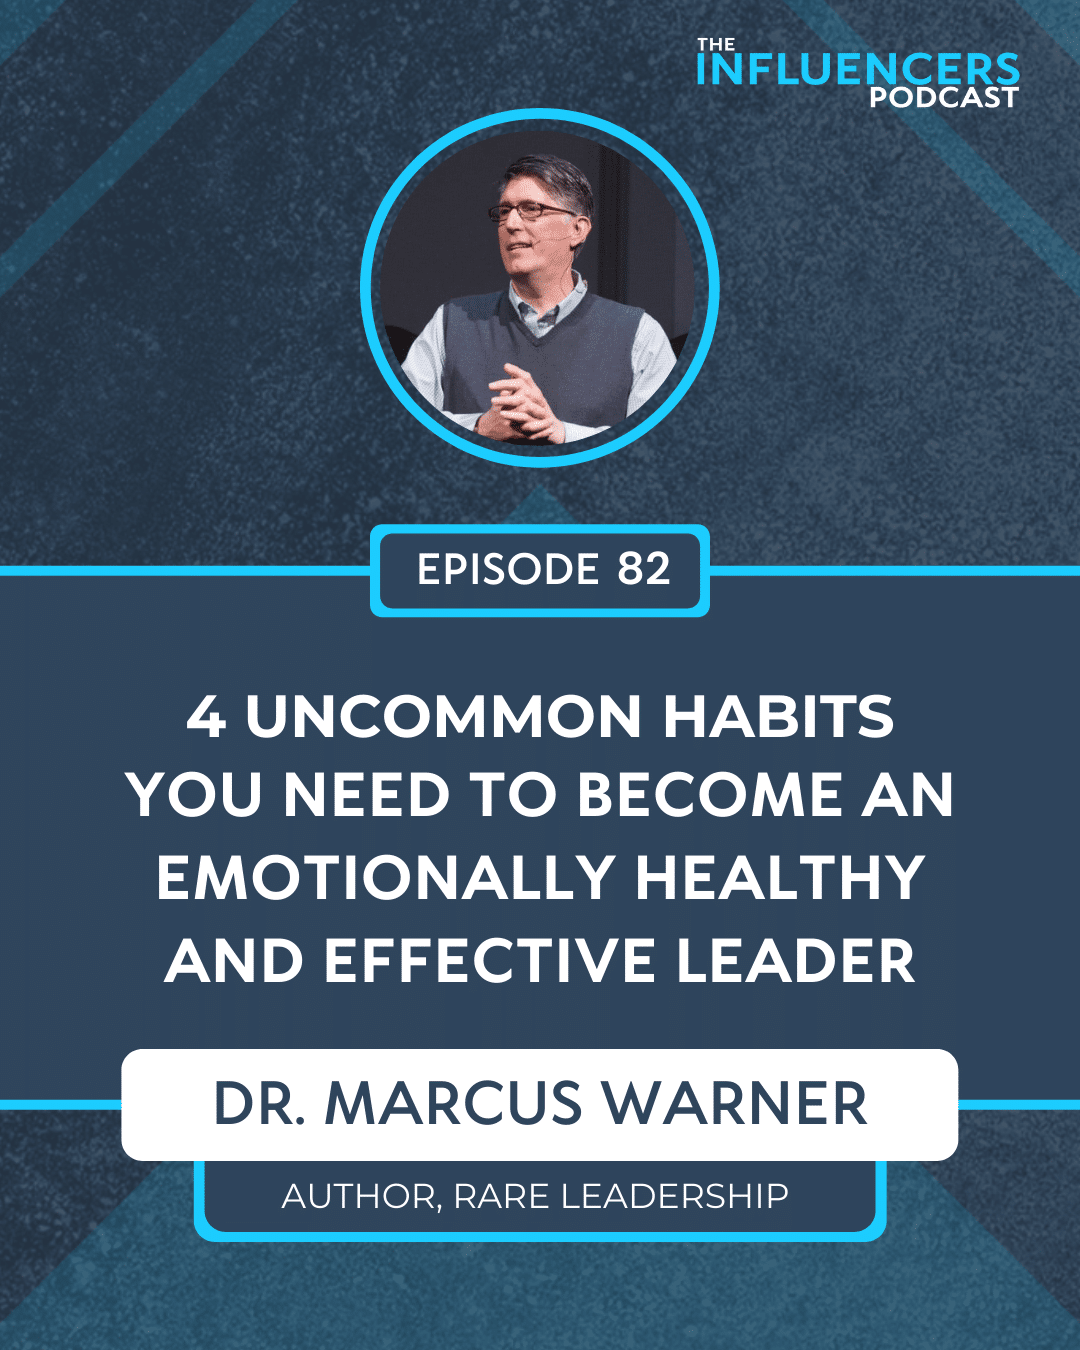 Episode 82 with Dr. Marcus Warner